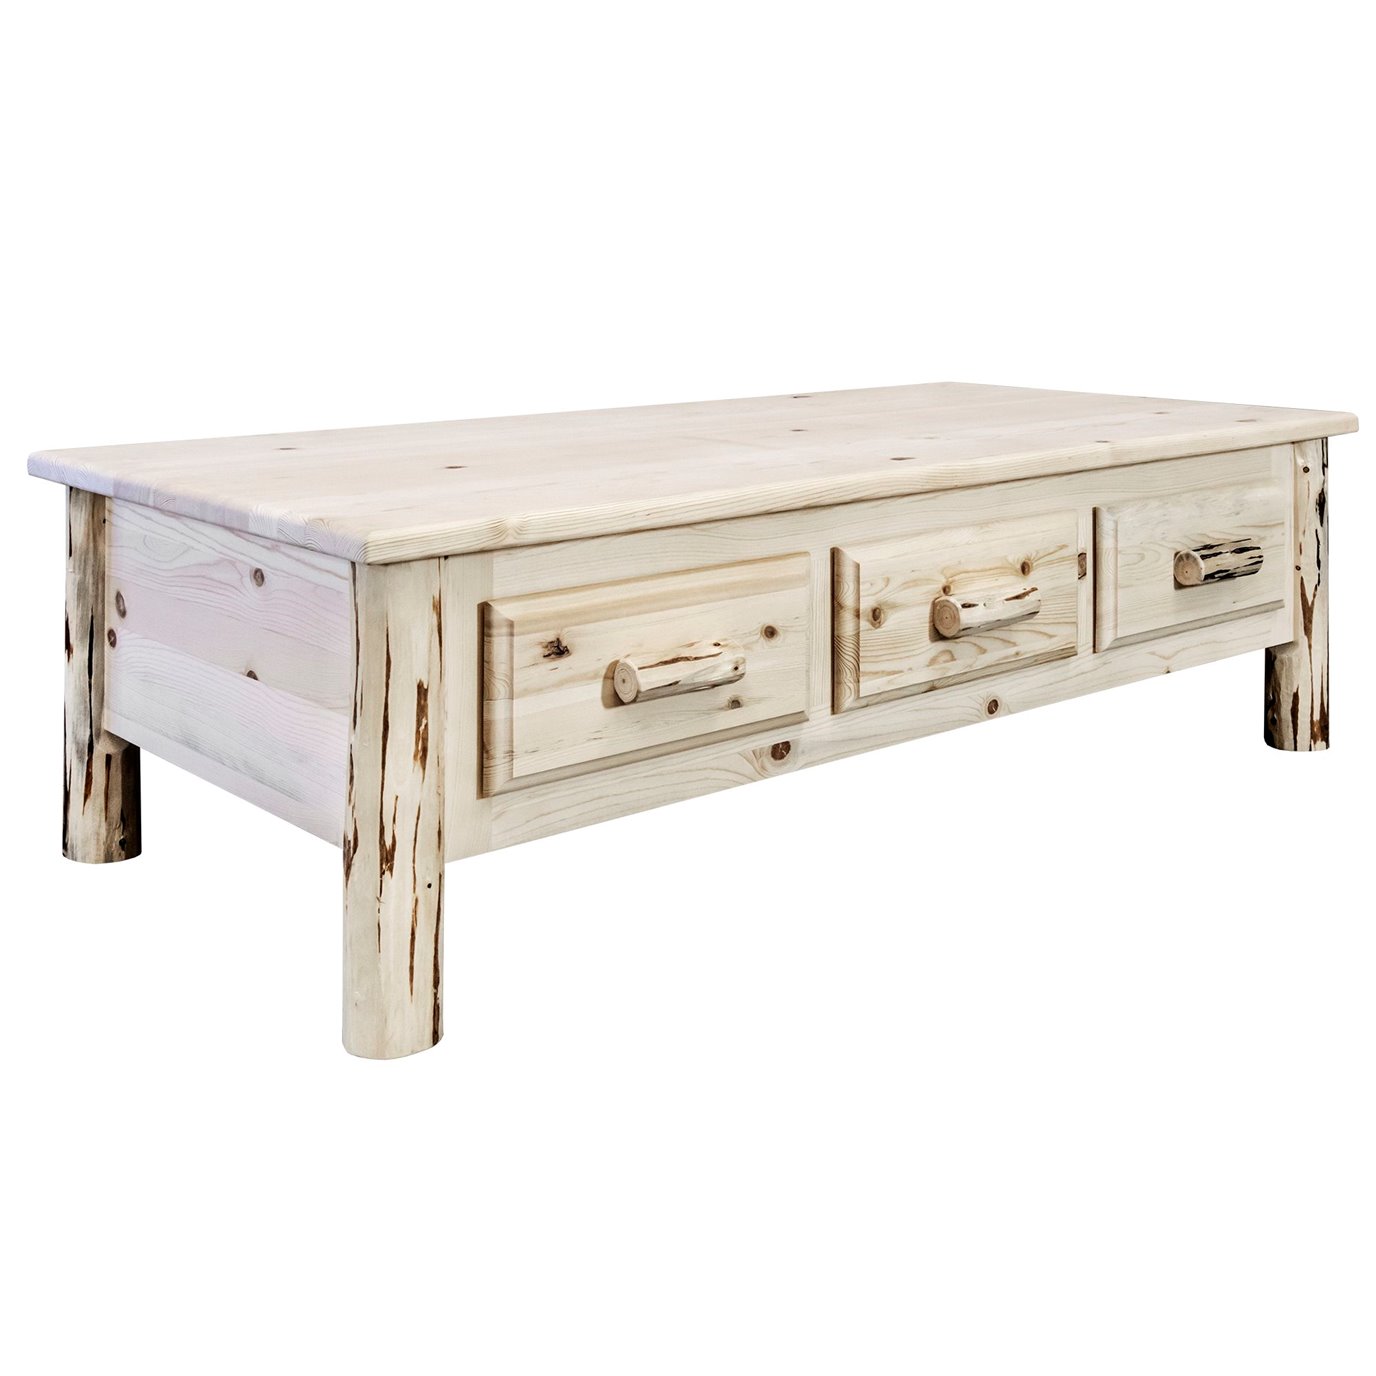 Montana Large Coffee Table w/ 6 Drawers - Clear Lacquer Finish